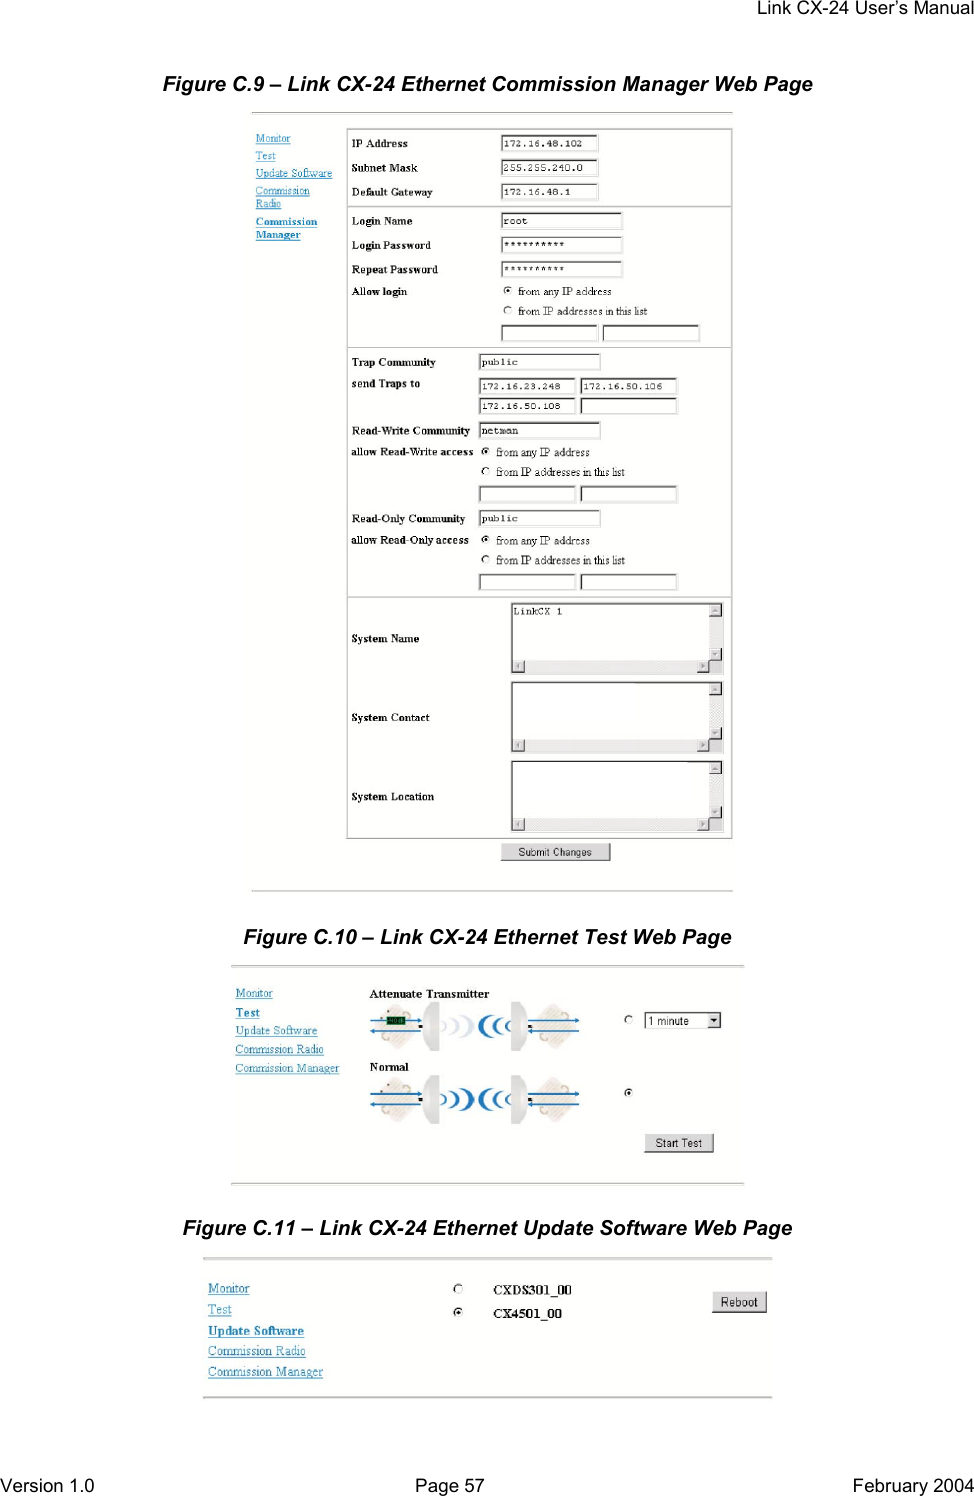     Link CX-24 User’s Manual Version 1.0  Page 57  February 2004 Figure C.9 – Link CX-24 Ethernet Commission Manager Web Page  Figure C.10 – Link CX-24 Ethernet Test Web Page  Figure C.11 – Link CX-24 Ethernet Update Software Web Page  